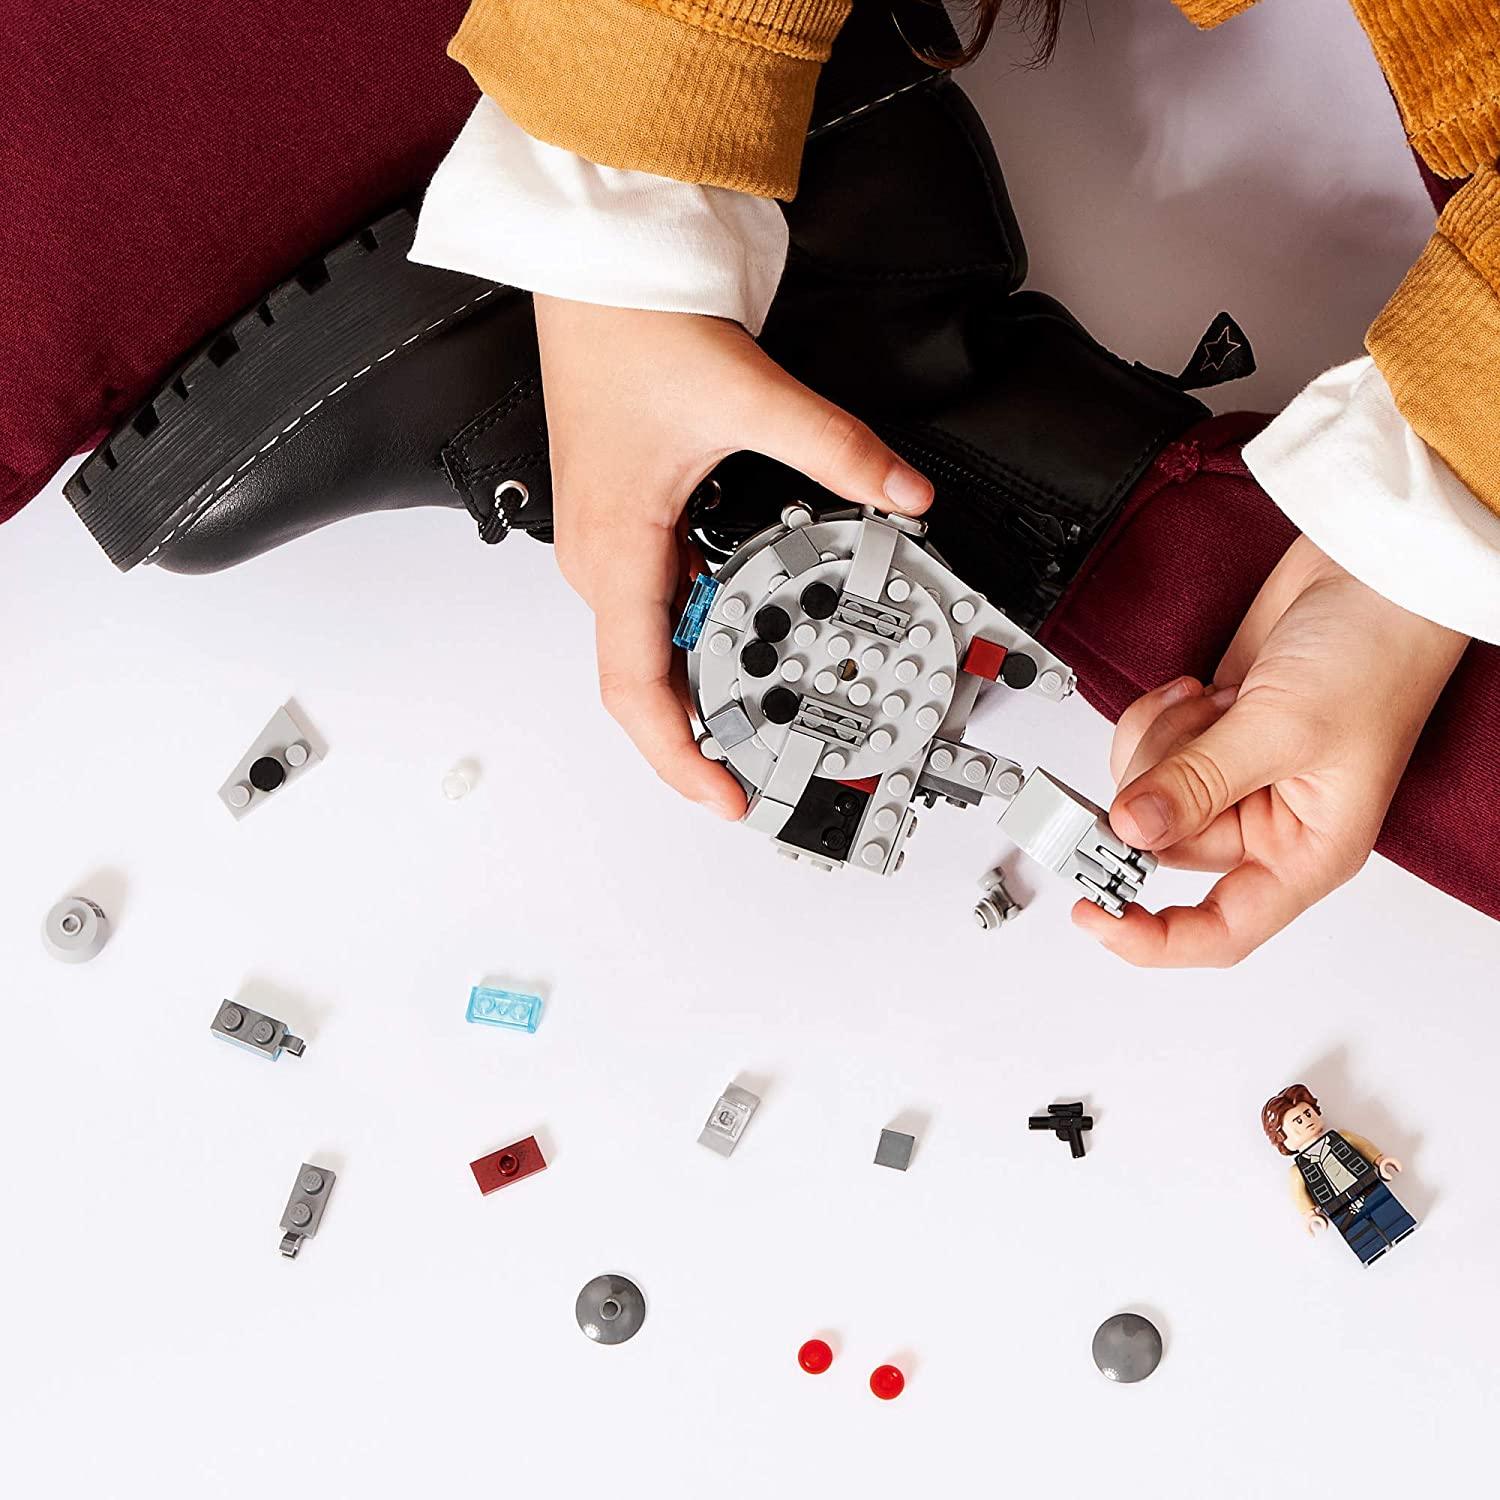 LEGO Star Wars Millennium Falcon Microfighter 75295 Building Kit (101 Pieces) - BumbleToys - 6+ Years, Boys, LEGO, OXE, star wars